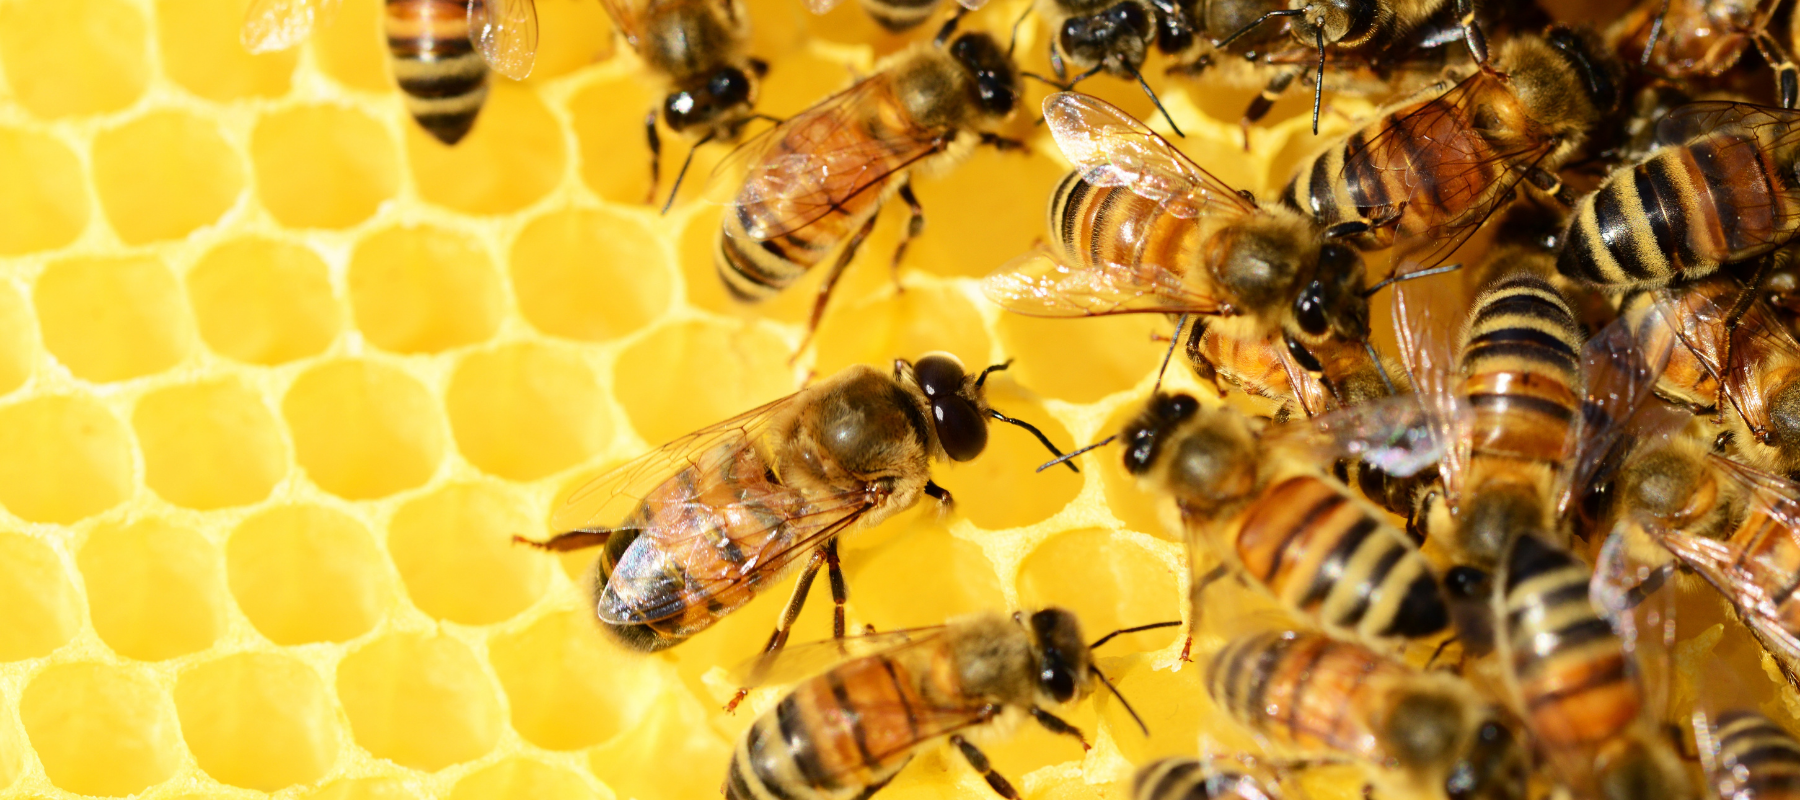 Why the collapse of bees is so important